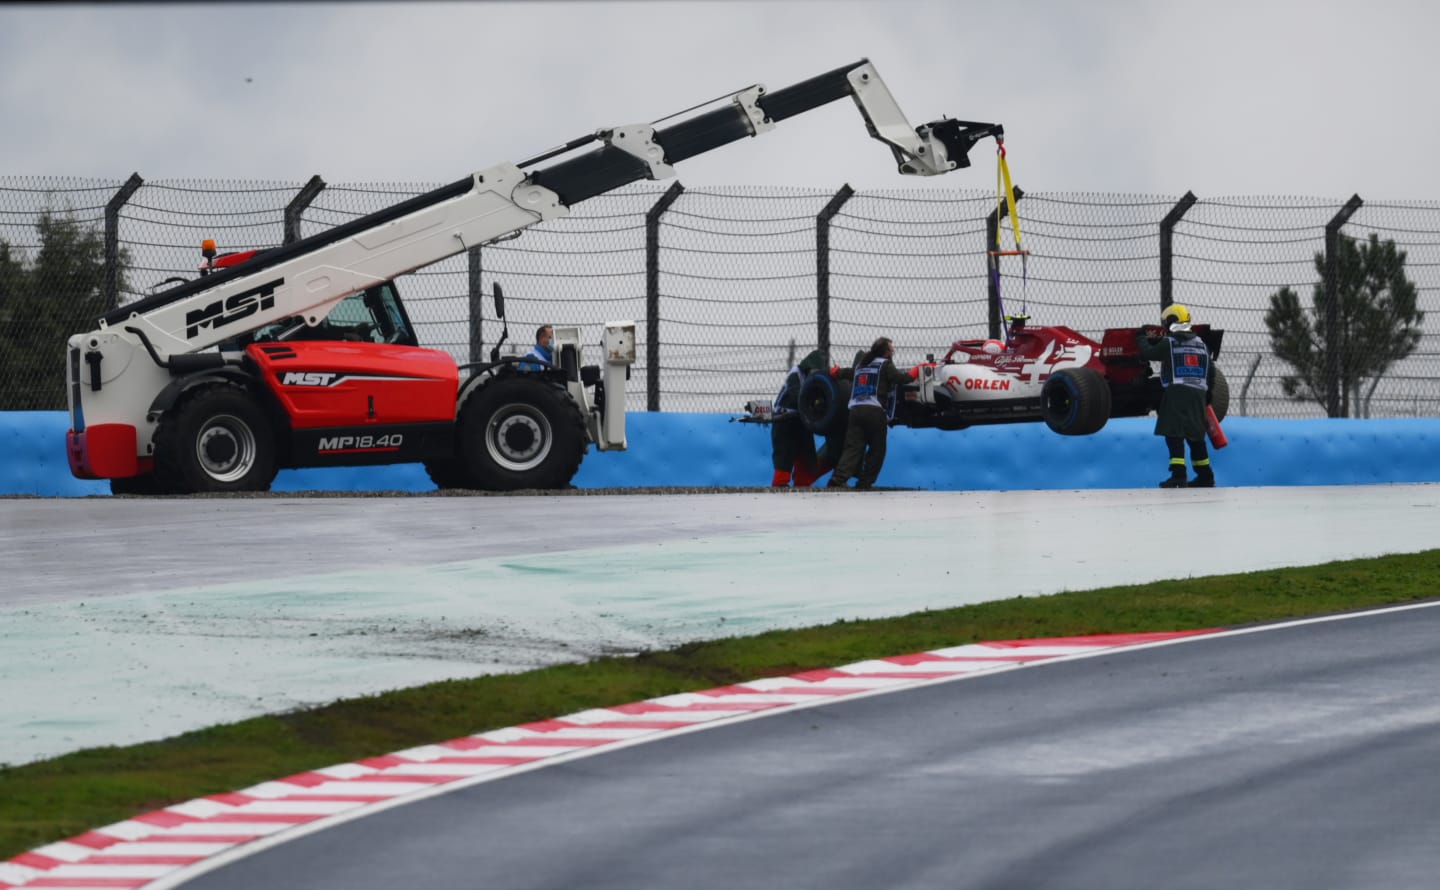 ISTANBUL, TURKEY - NOVEMBER 15: The car of Antonio Giovinazzi of Italy and Alfa Romeo Racing is removed from the track after spinning off on the way to the grid before the F1 Grand Prix of Turkey at Intercity Istanbul Park on November 15, 2020 in Istanbul, Turkey. (Photo by Clive Mason/Getty Images)